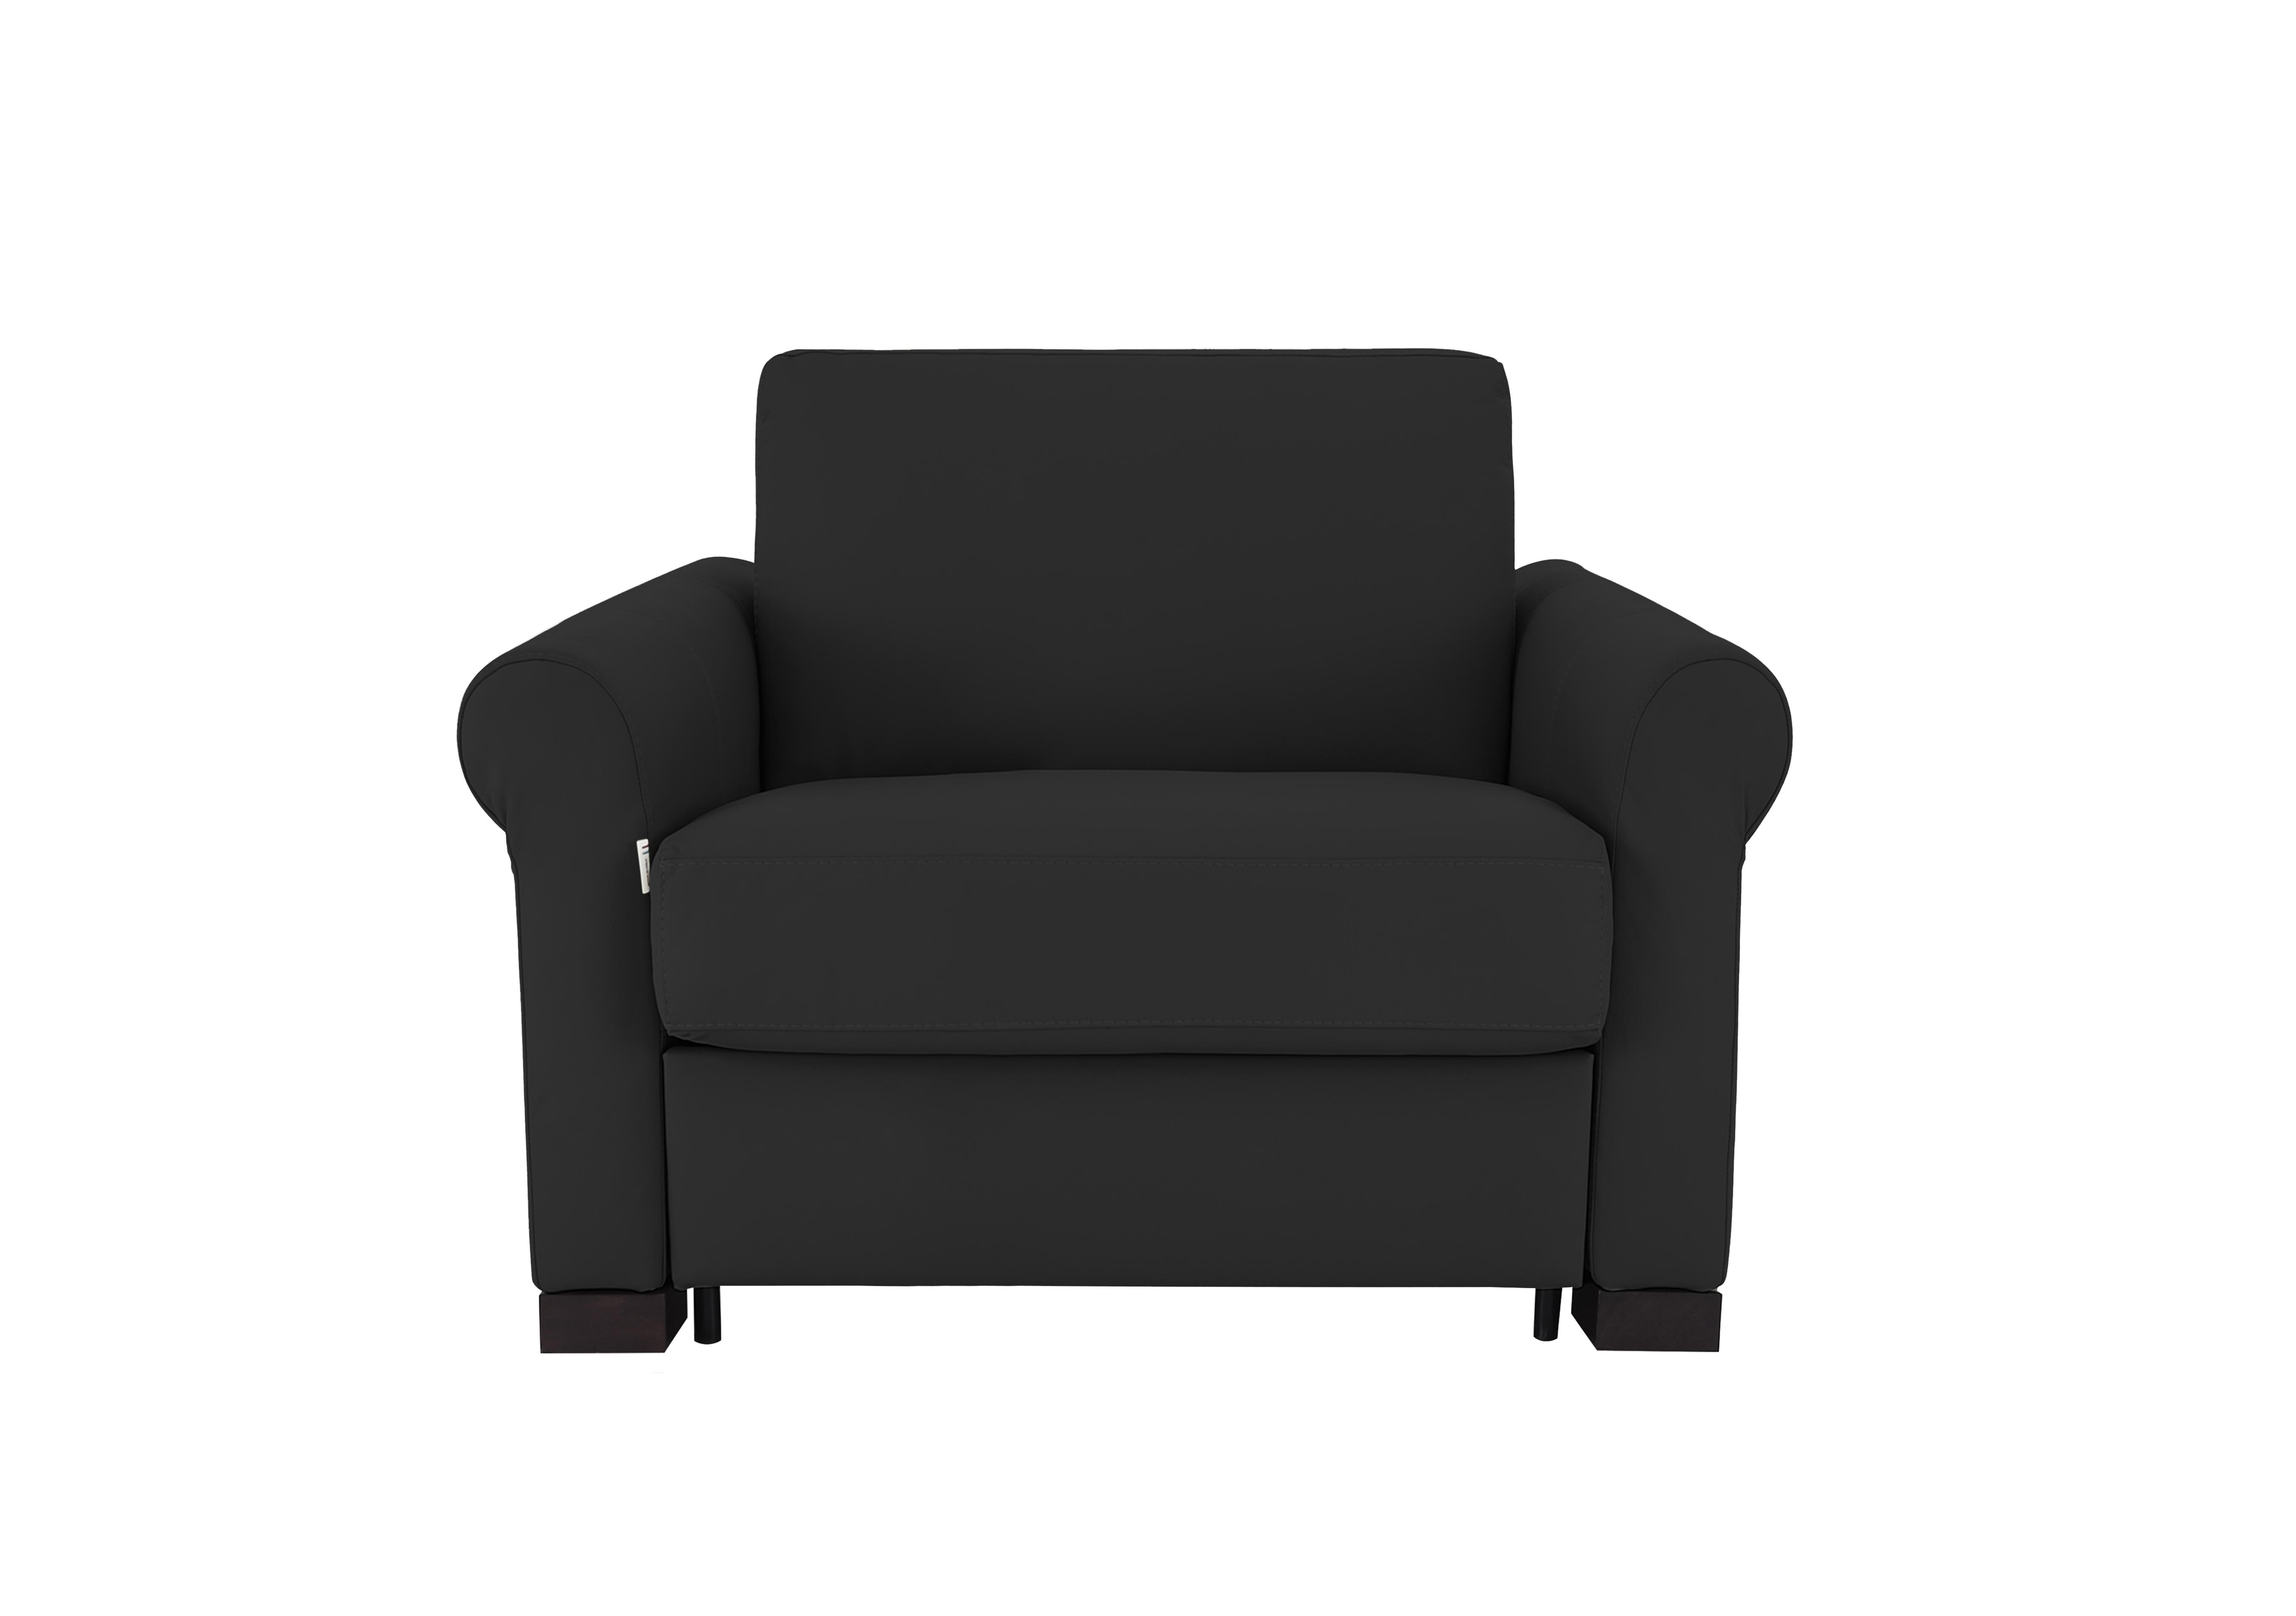 Alcova Leather Chair Sofa Bed with Scroll Arms in Torello Nero 71 on Furniture Village